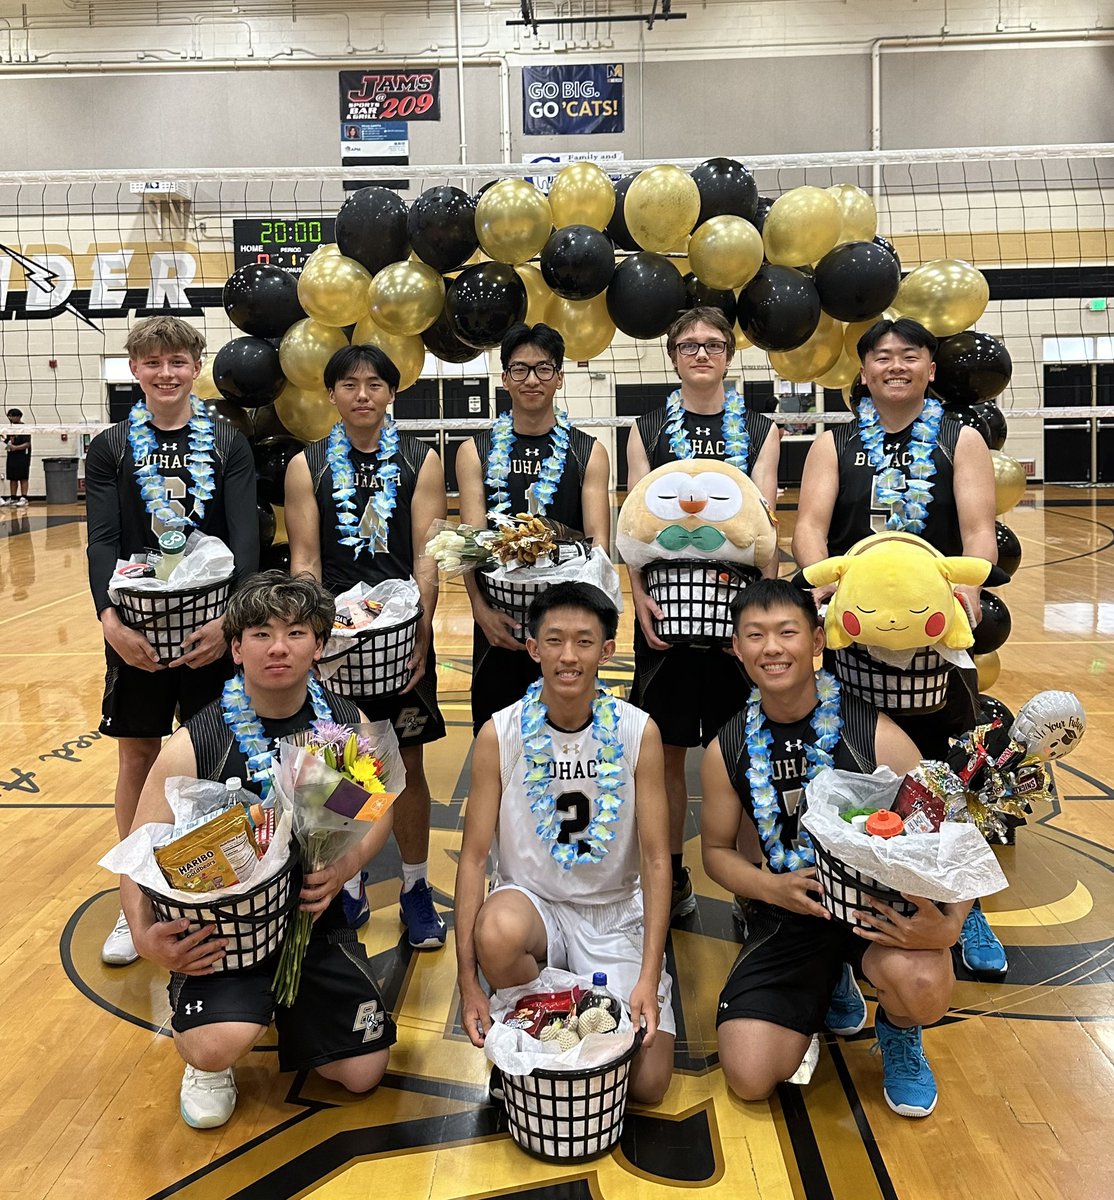 Thank you to our BC Boys Volleyball seniors for an unforgettable season! Cherish the memories you all have made and best of luck in your futures! ⚡️🏐🎓💫